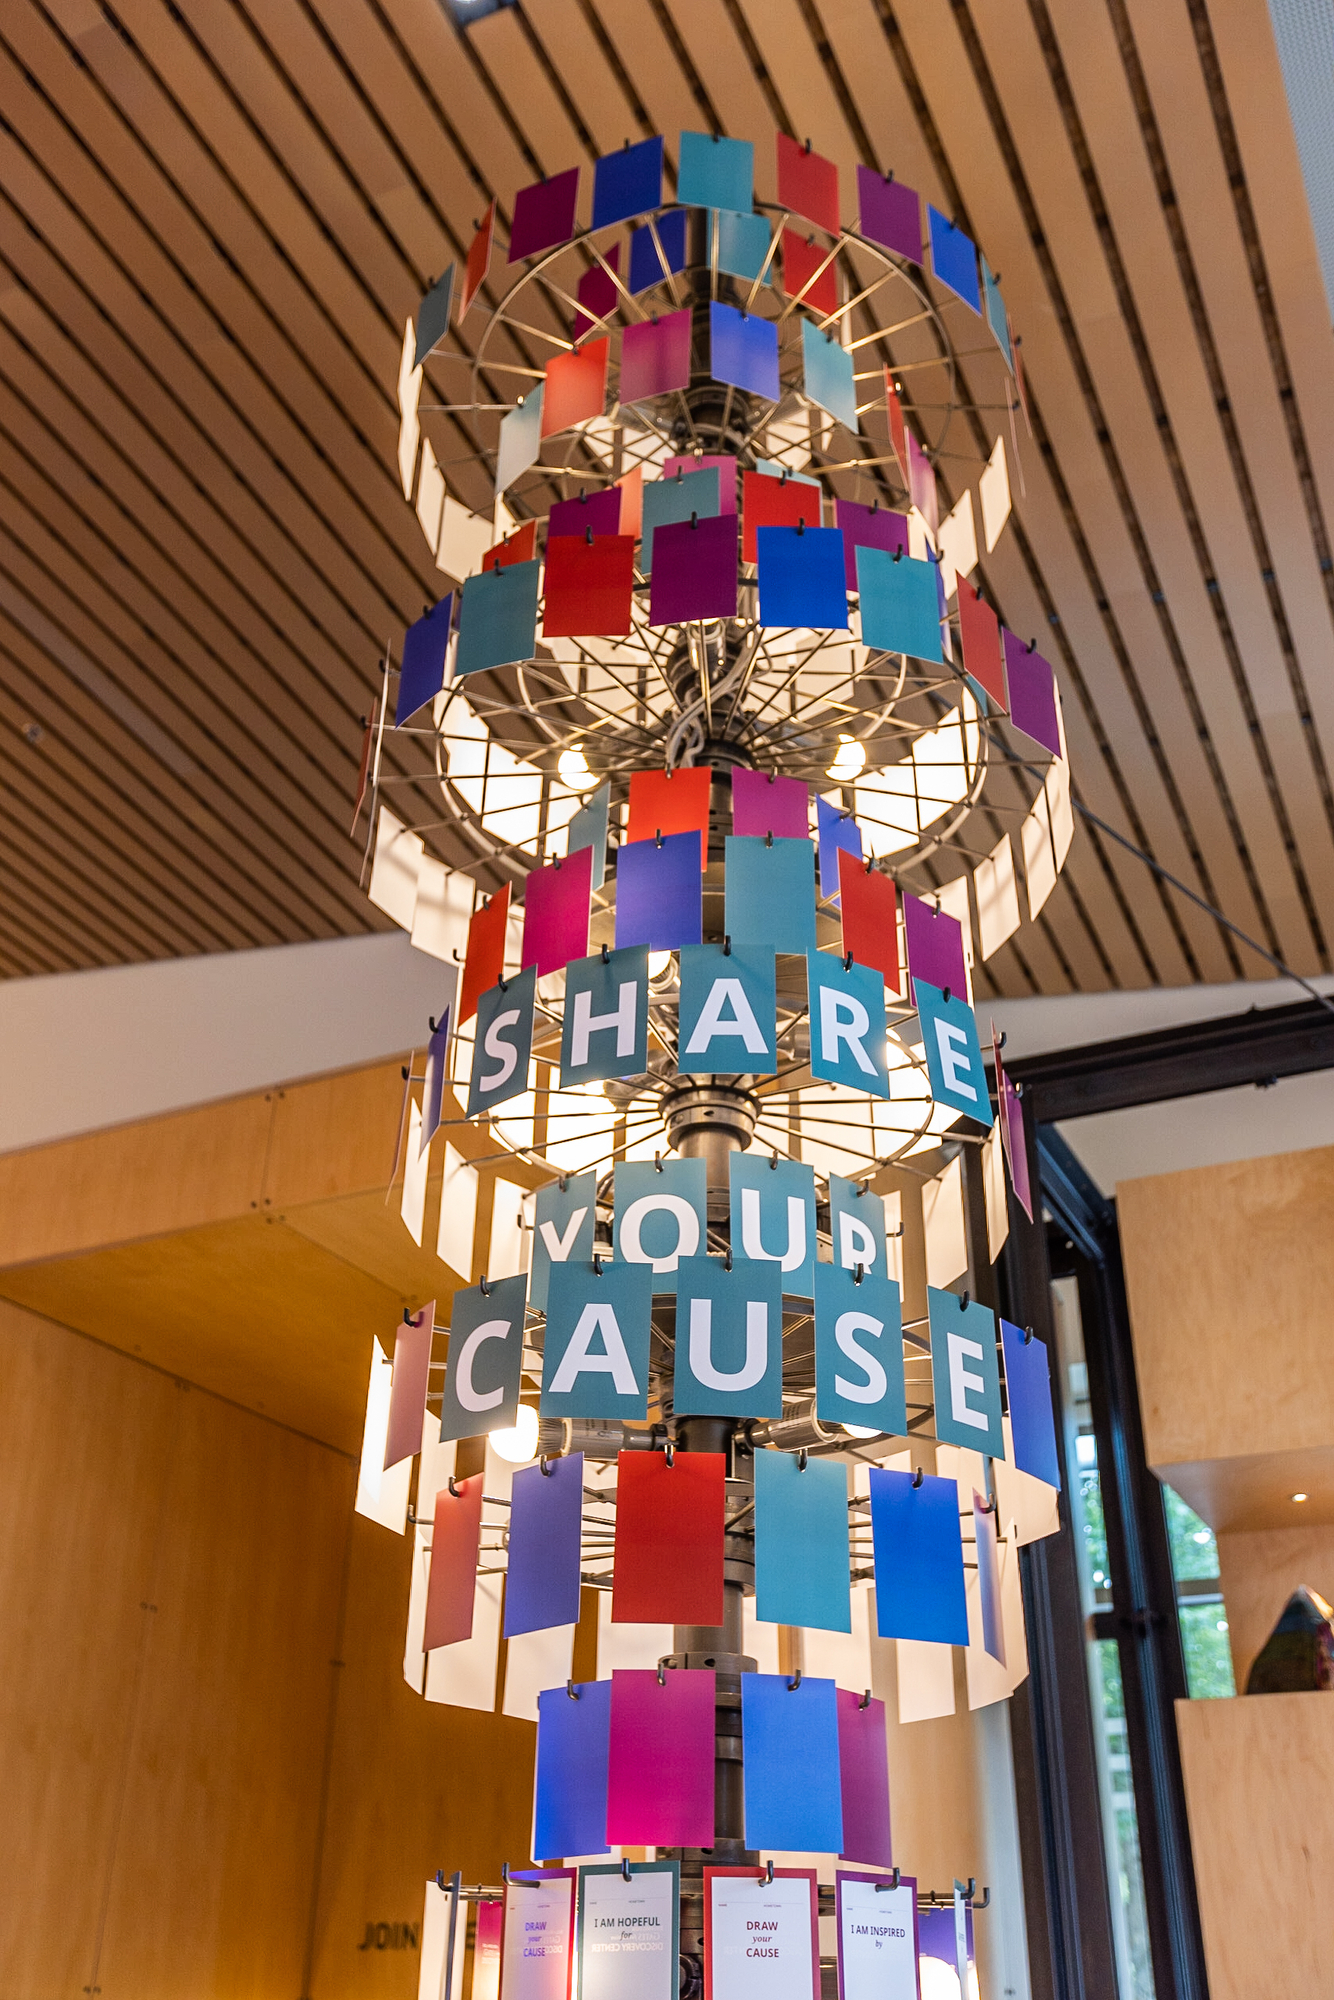 Share your cause multicolored installation